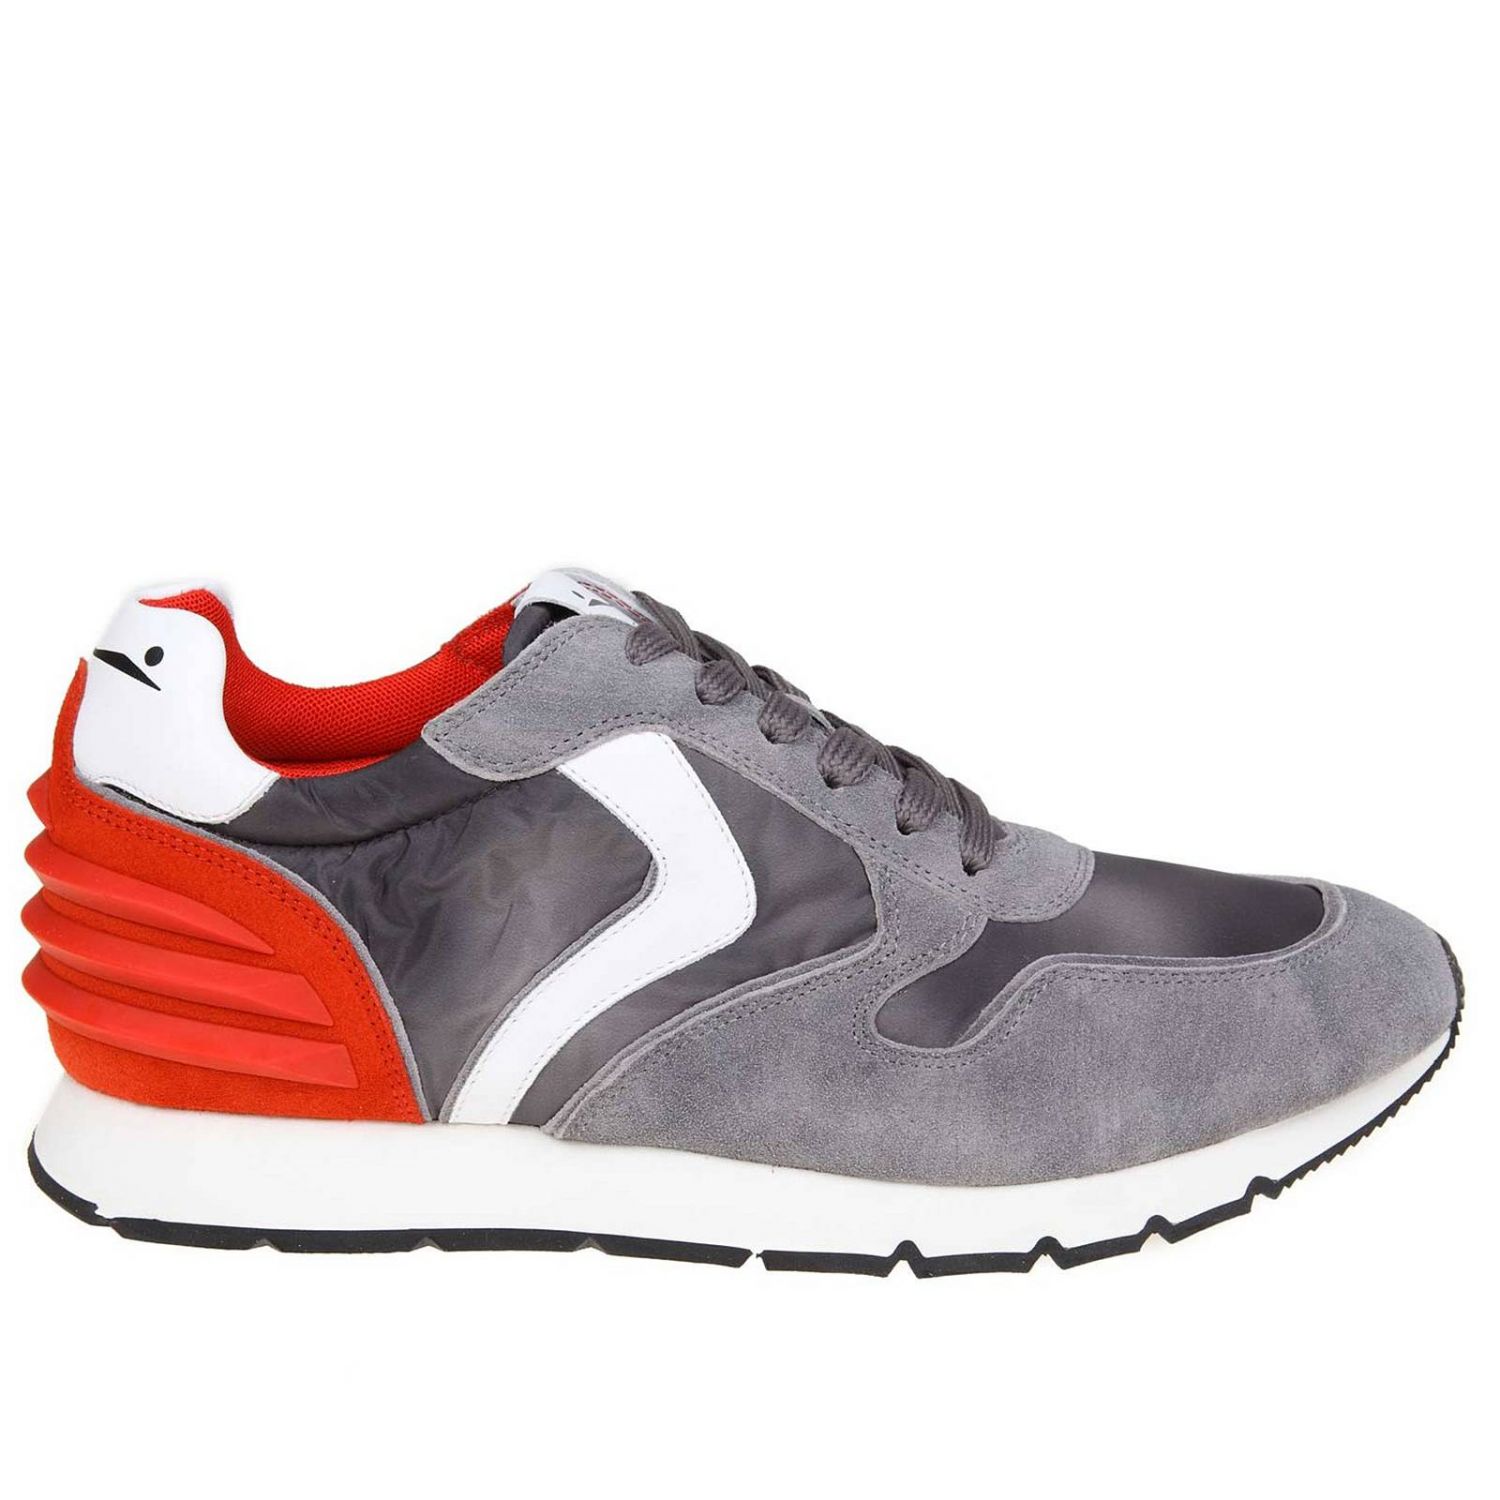 Voile Blanche Outlet: Sneakers men - Grey | Sneakers Voile Blanche ...